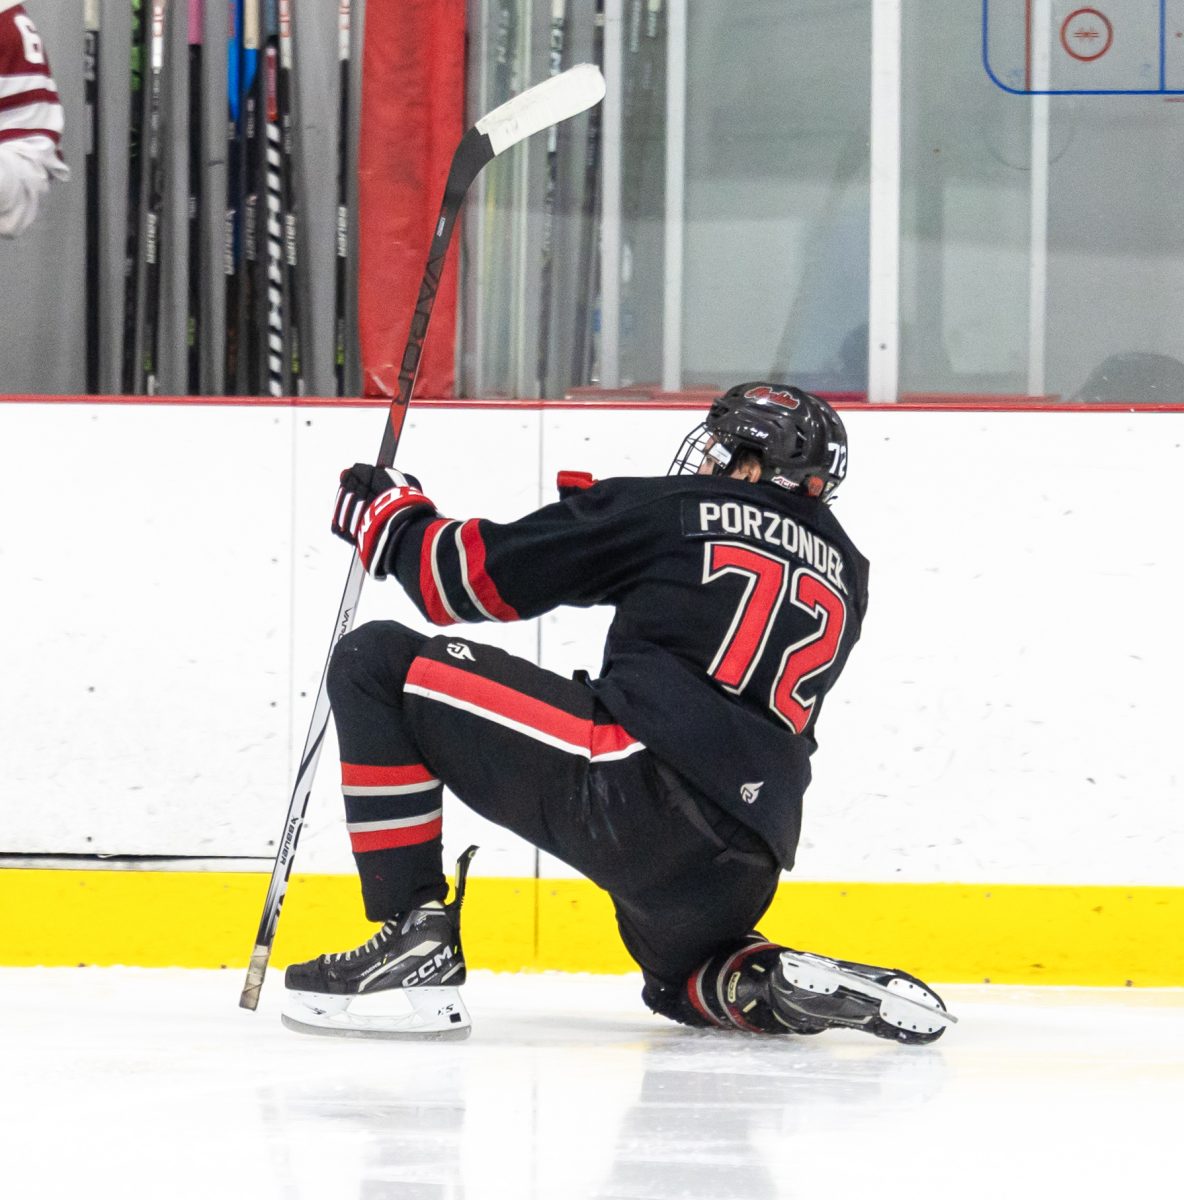 Fifth-year defenseman Alec Porzondek celebrates scoring in NIU Hockeys 4-1 win over Alabama on Friday. The Huskies earned their first win of the season in the win over the Crimson Tide. (Courtesy NIU Hockey)